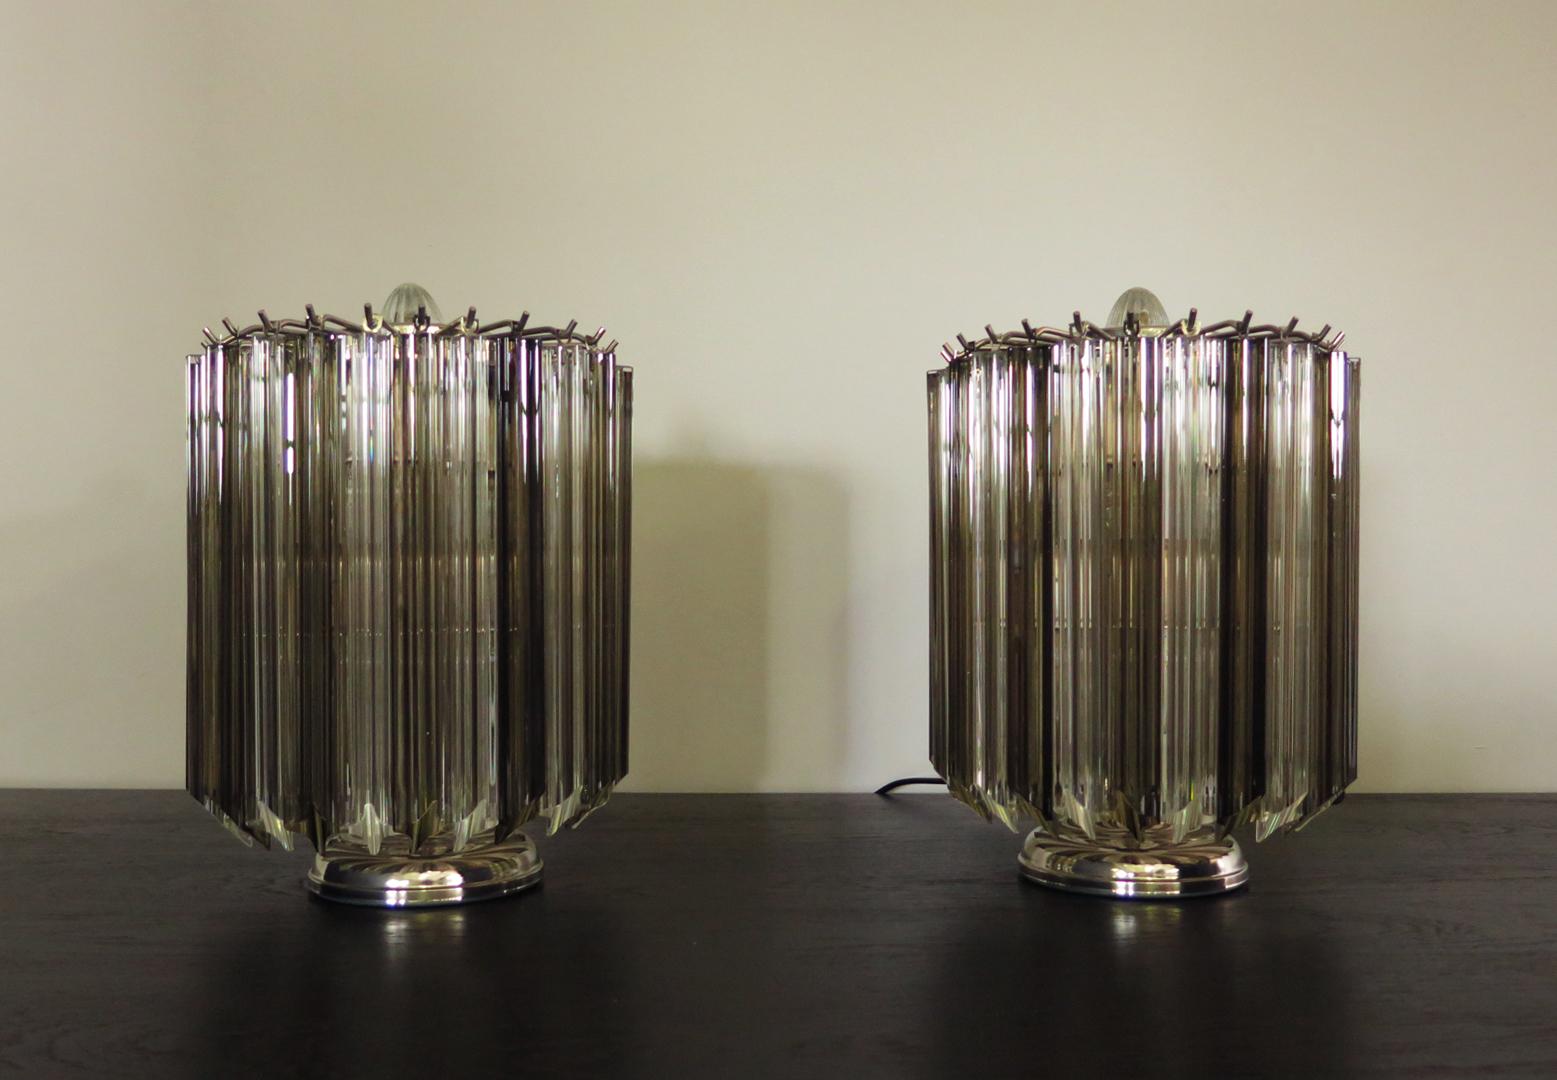 Pair of Table Lamps, 24 Transparent and Smoked Quadriedri, Murano, 1990s For Sale 8